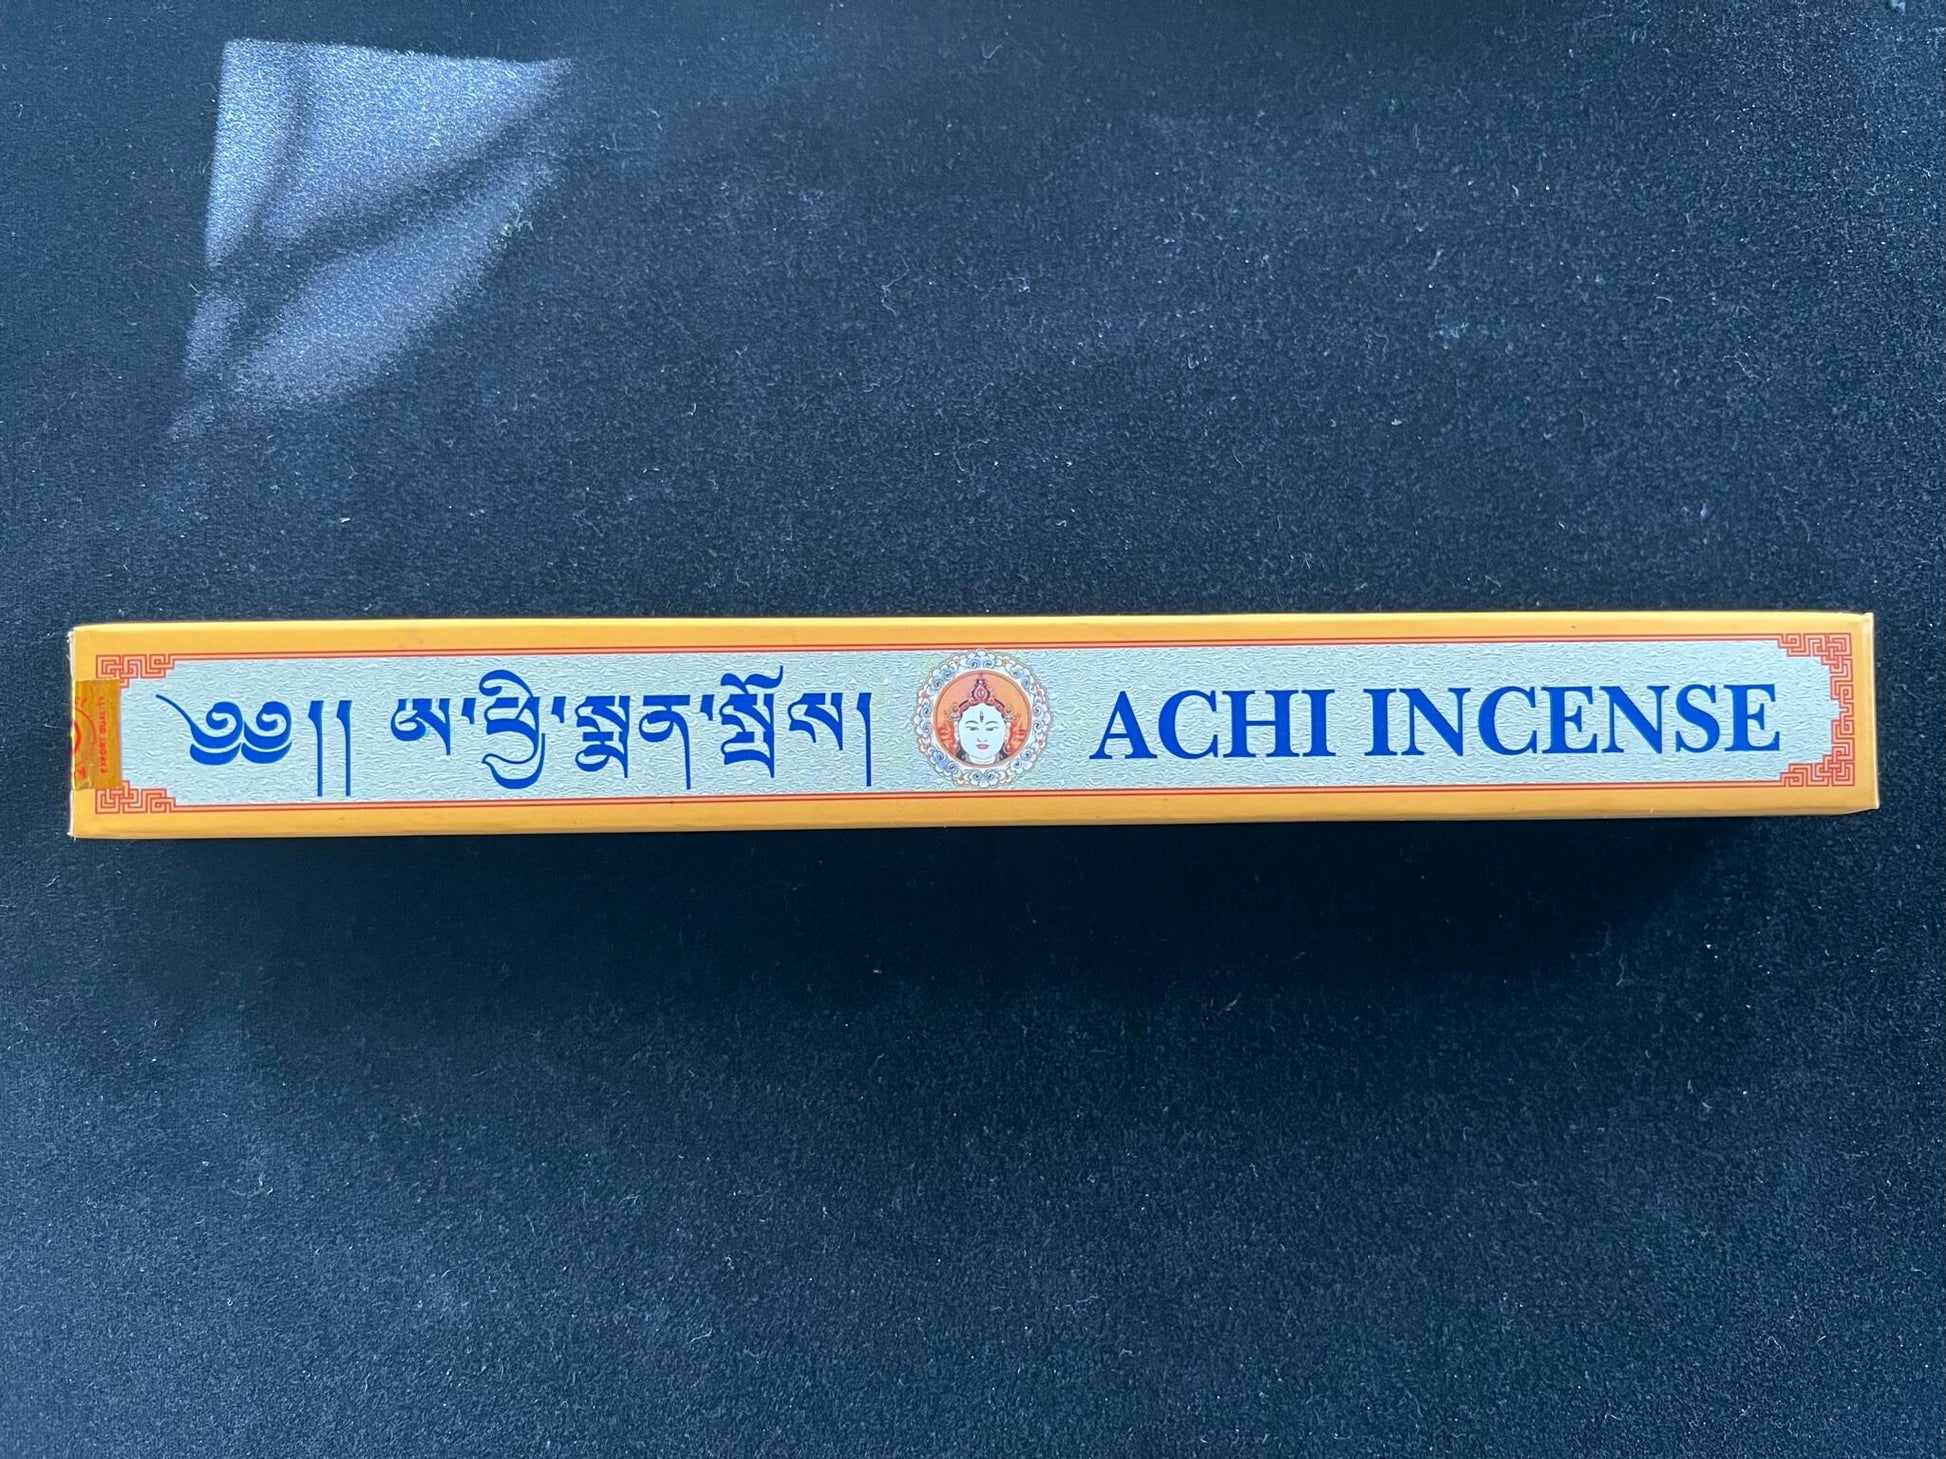 Achi Incense box on black velvet. Try our specialty incense for an enhanced meditation experience.